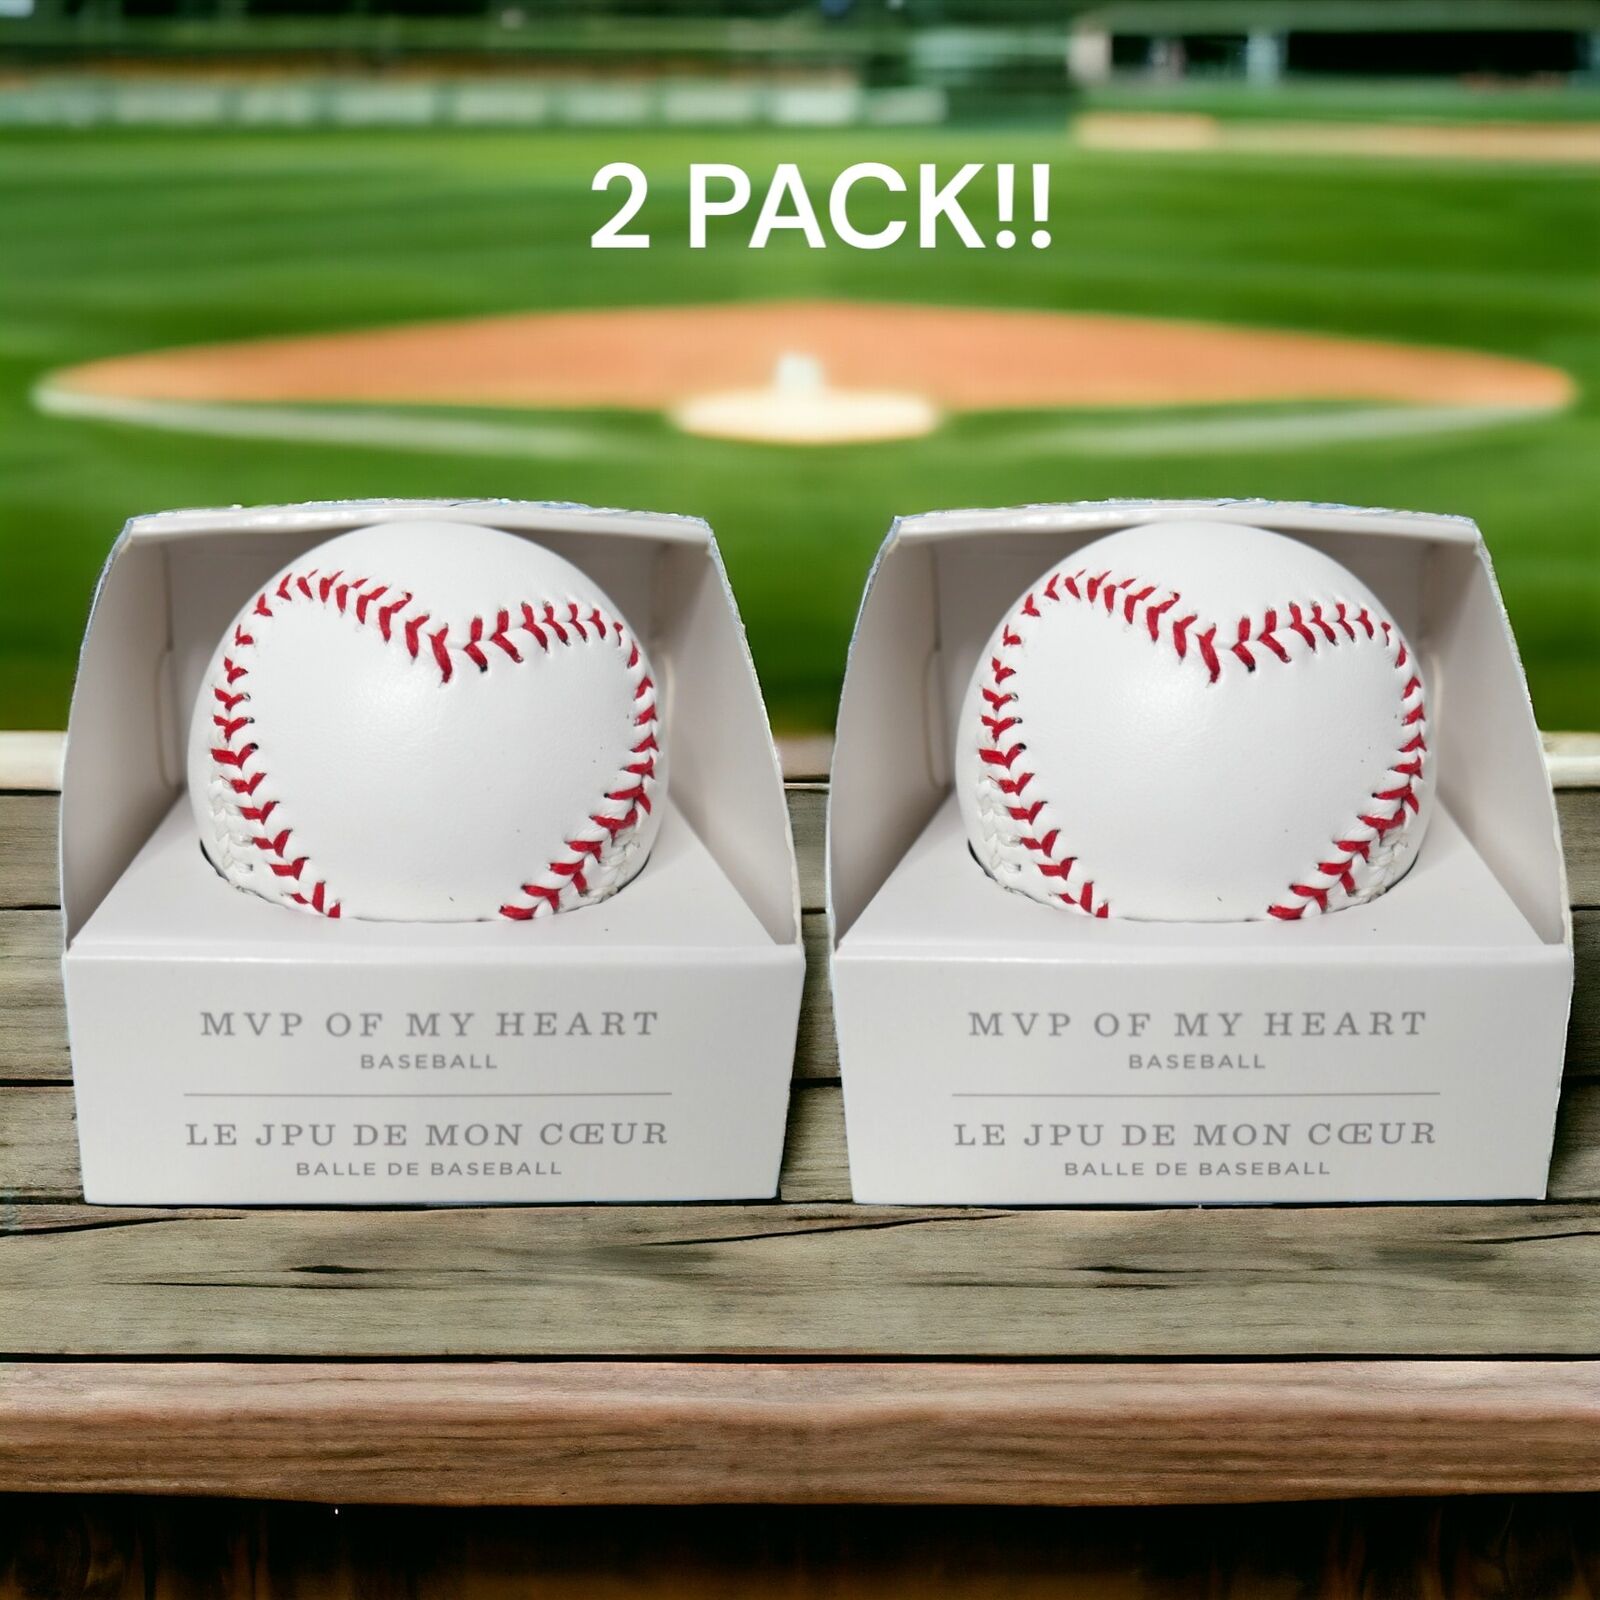 Hallmark MVP OF MY HEART 2 PACK Stitched BASEBALL Father\'s Day Gift NEW IN BOX